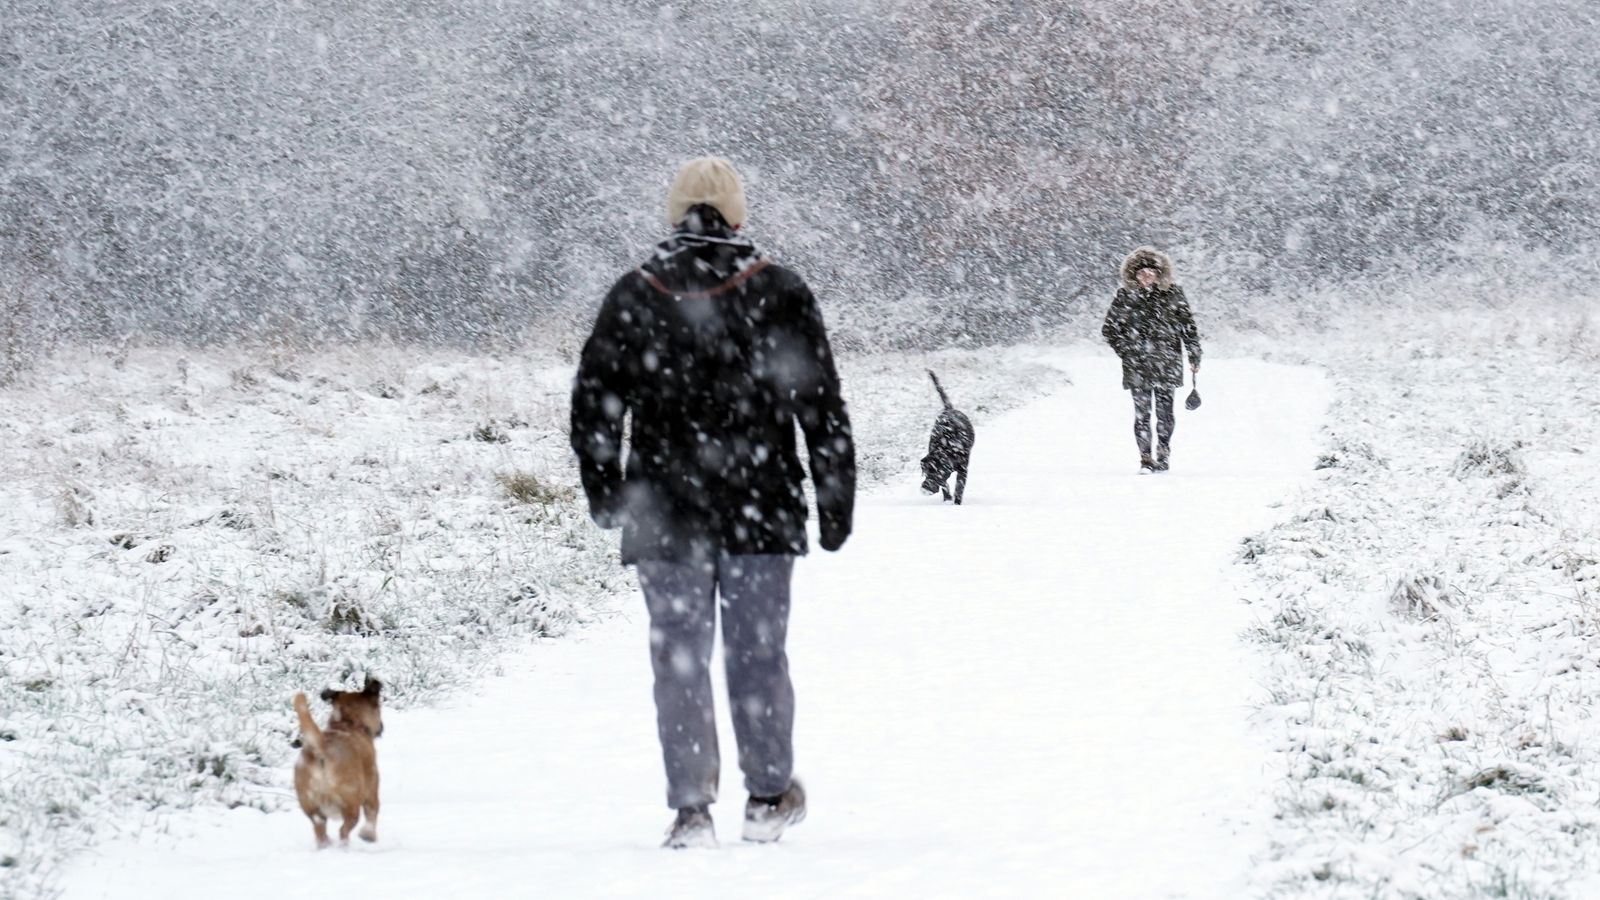 UK weather: Snow and ice warnings in place with freezing temperatures for many